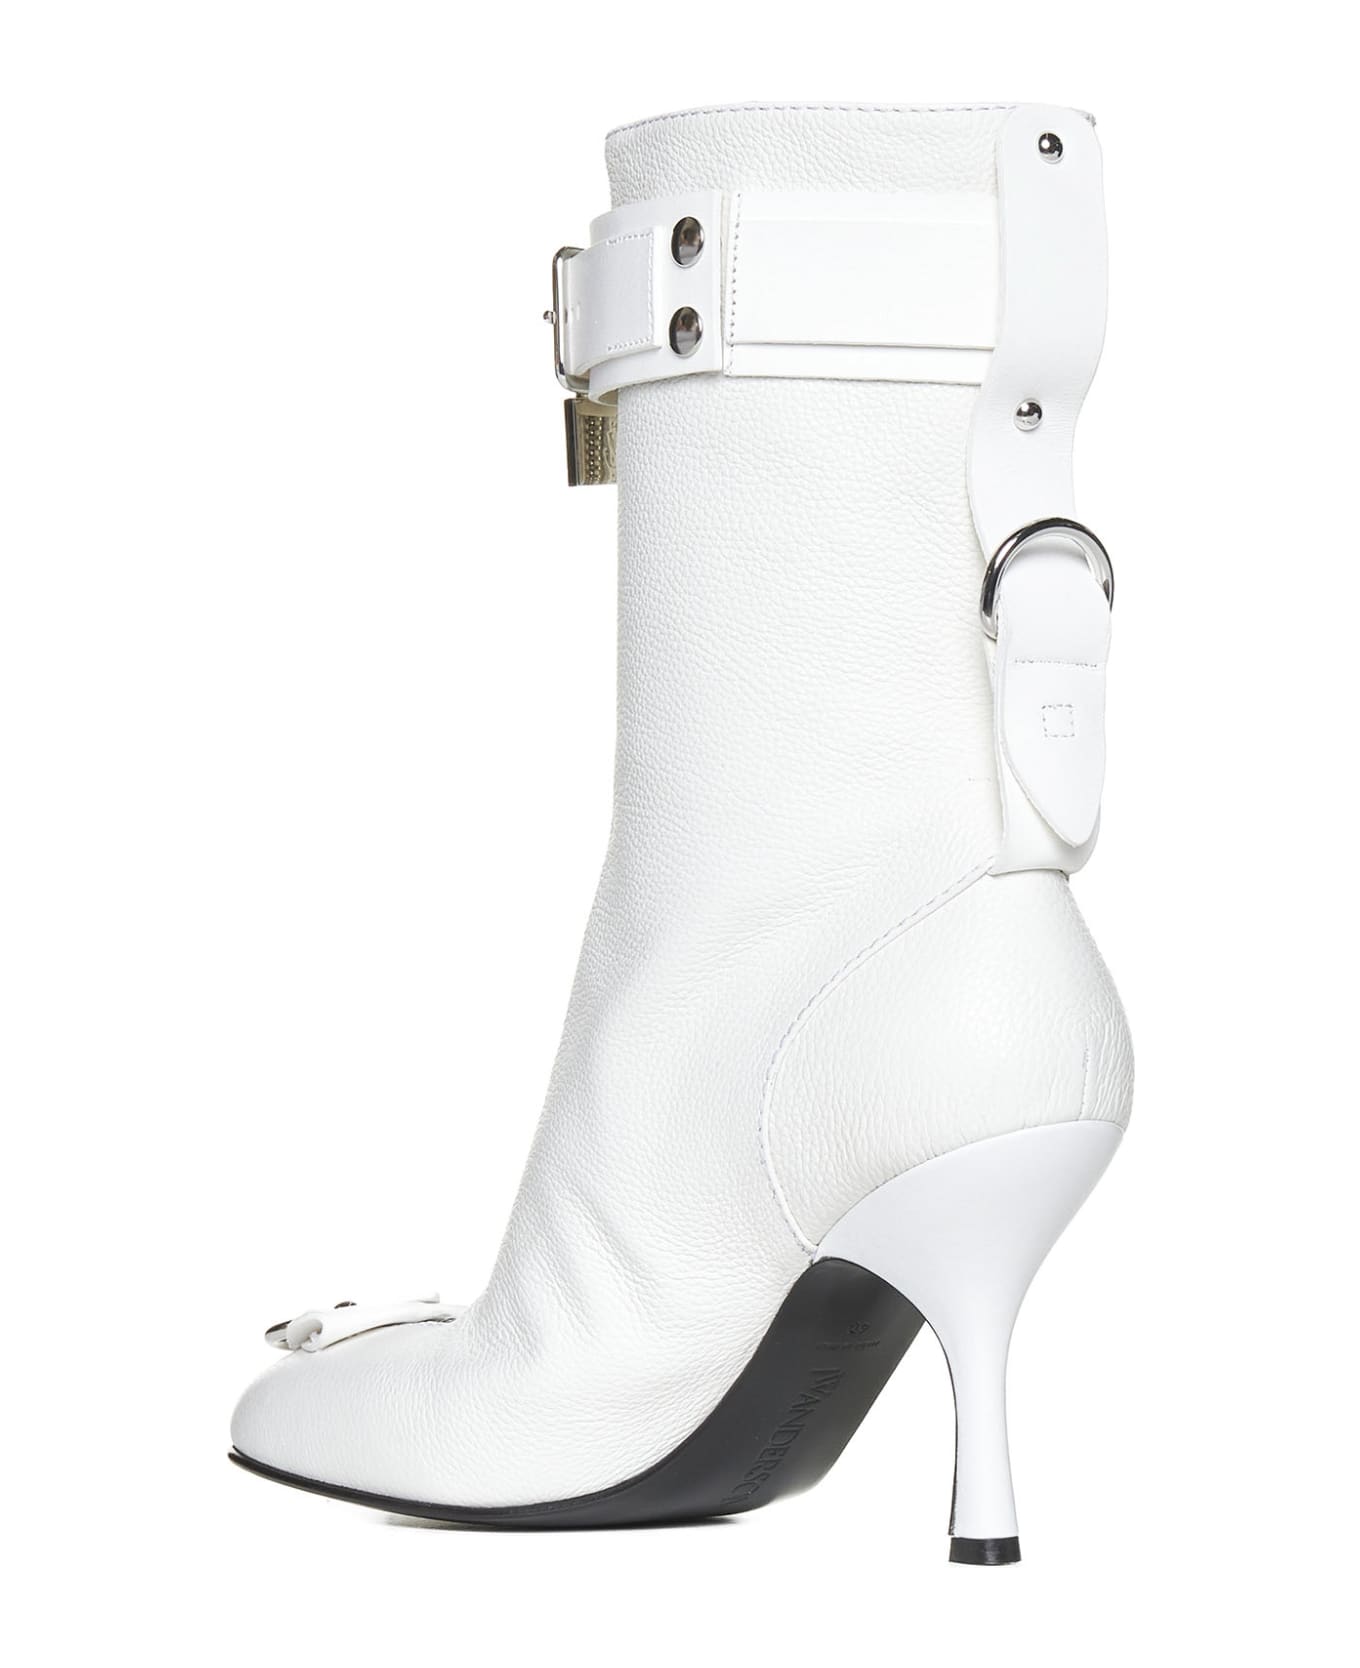 J.W. Anderson Boots - White